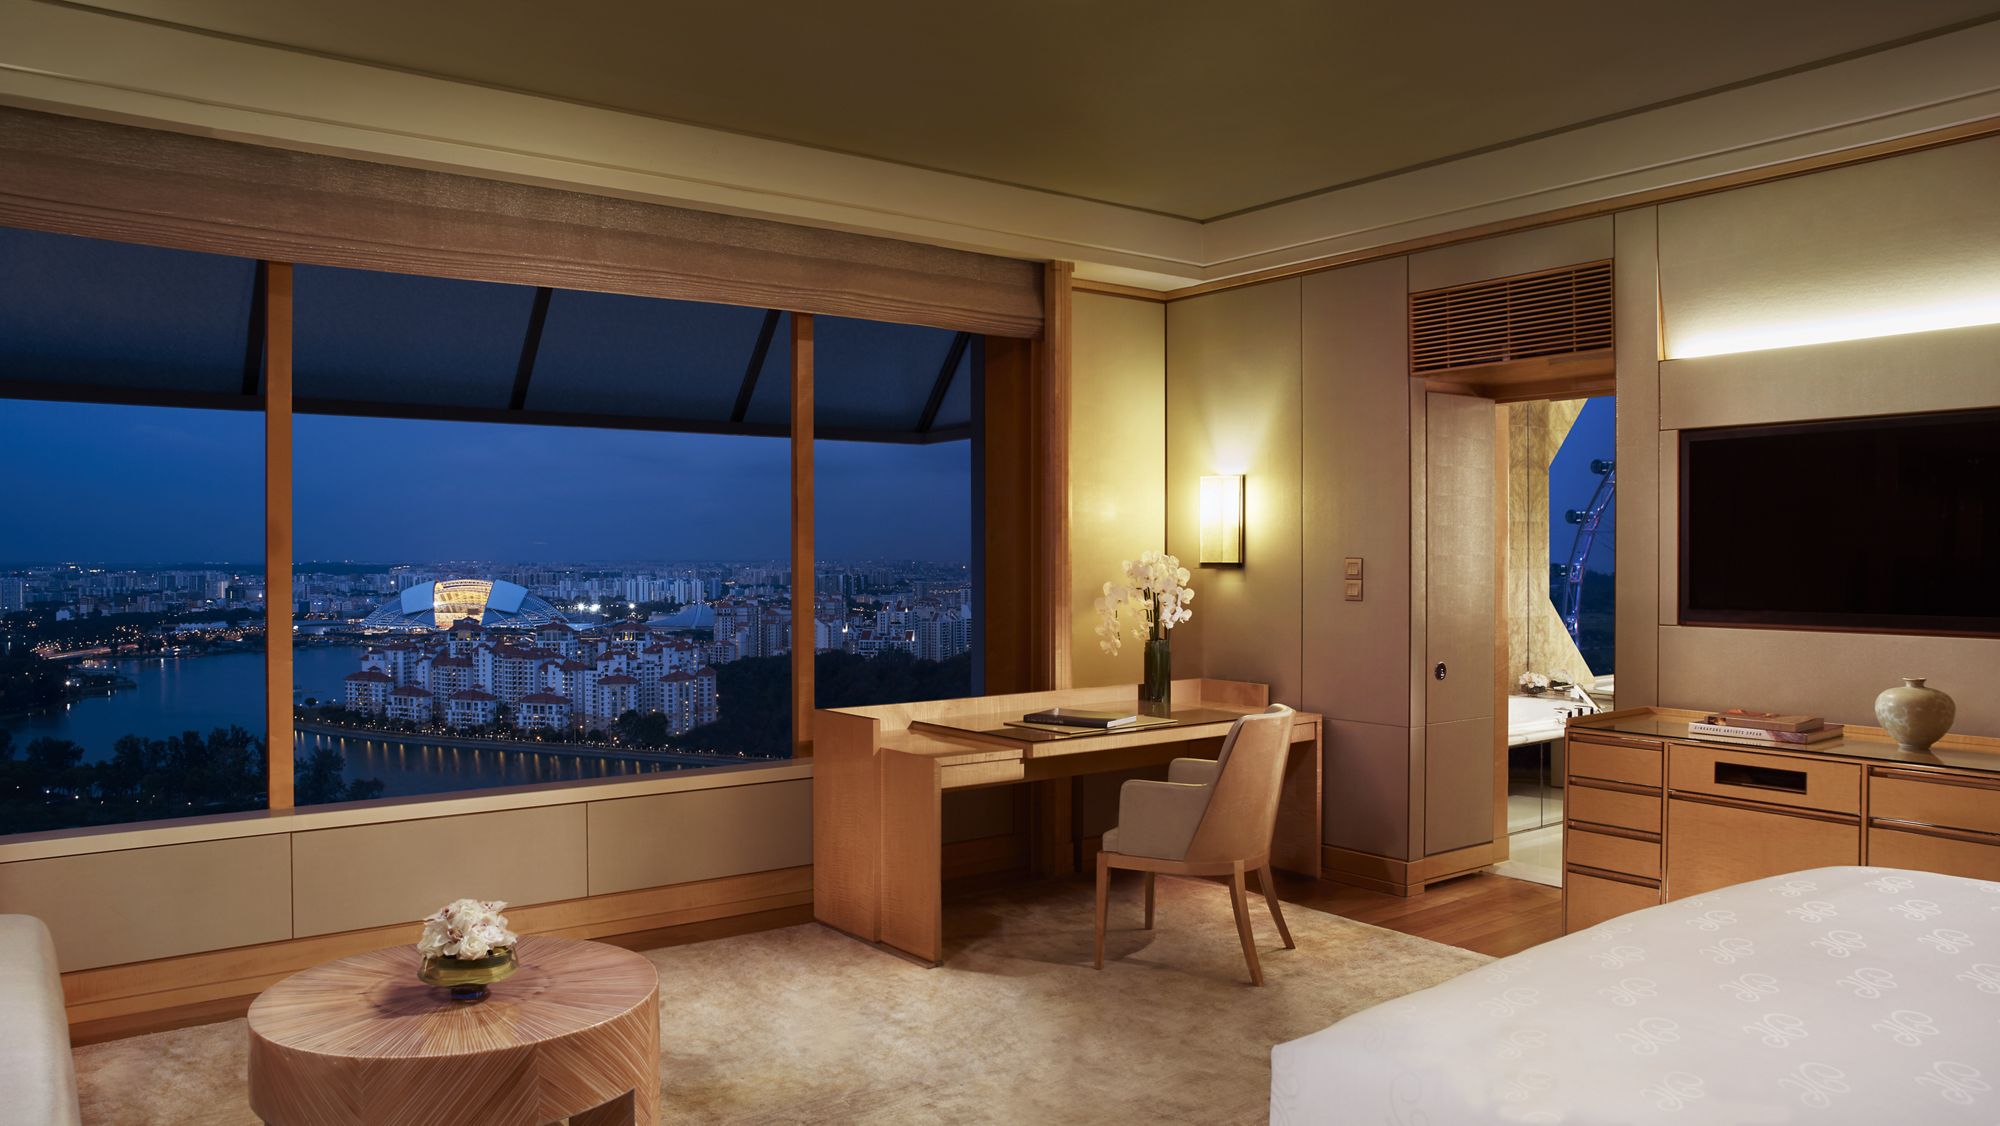 Guest room outfitted in honey-colored wood and carpet with wall-to-wall windows overlooking the city lights in the evening